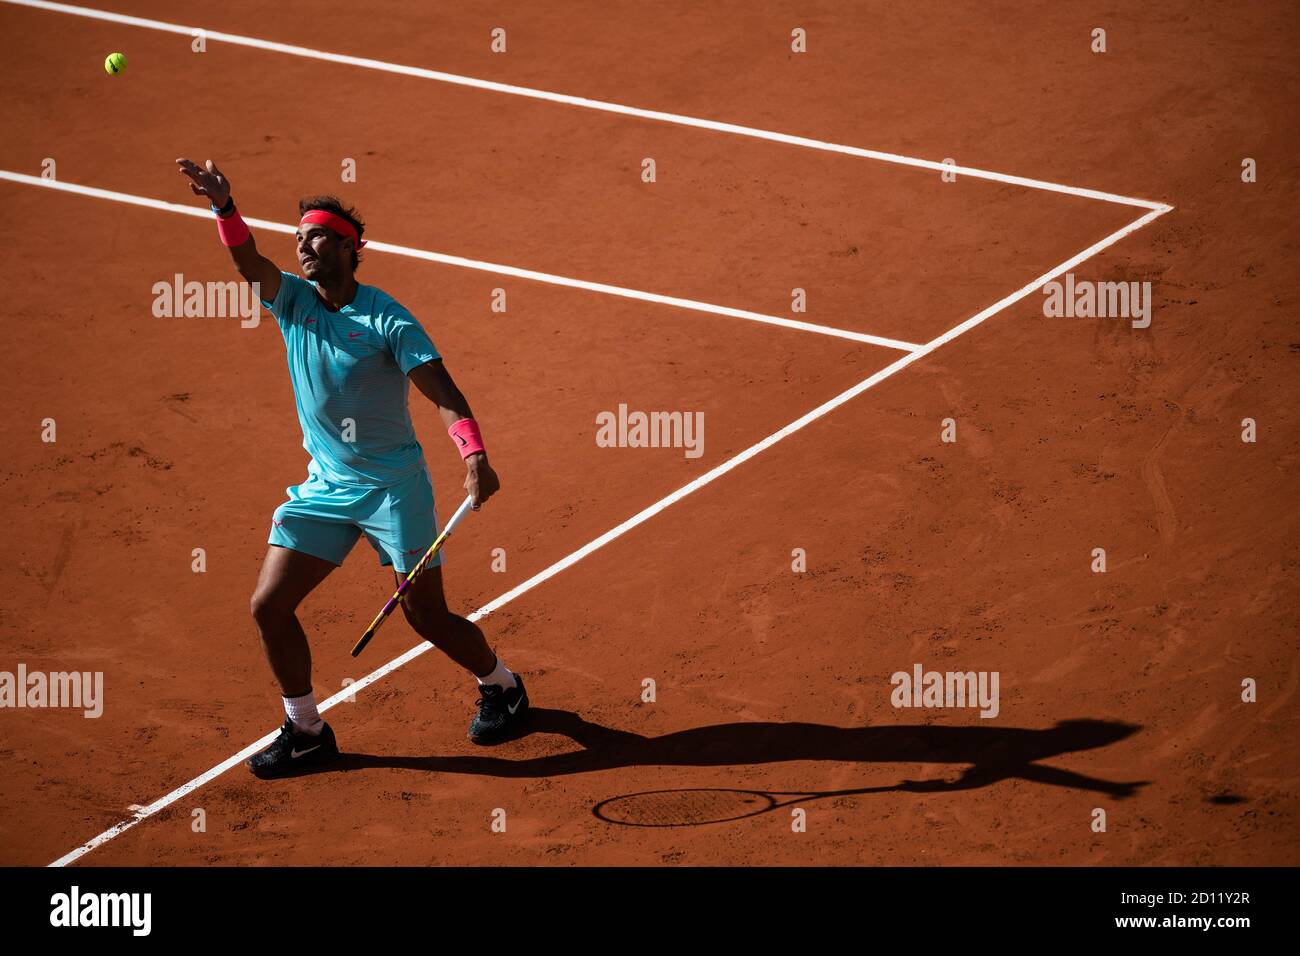 Paris, France. 4th Oct, 2020. Rafael Nadal serves during the men's singles 4th round match between Rafael Nadal of Spain and Sebastian Korda of the United States at the French Open tennis tournament 2020 at Roland Garros in Paris, France, Oct. 4, 2020. Credit: Aurelien Morissard/Xinhua/Alamy Live News Stock Photo